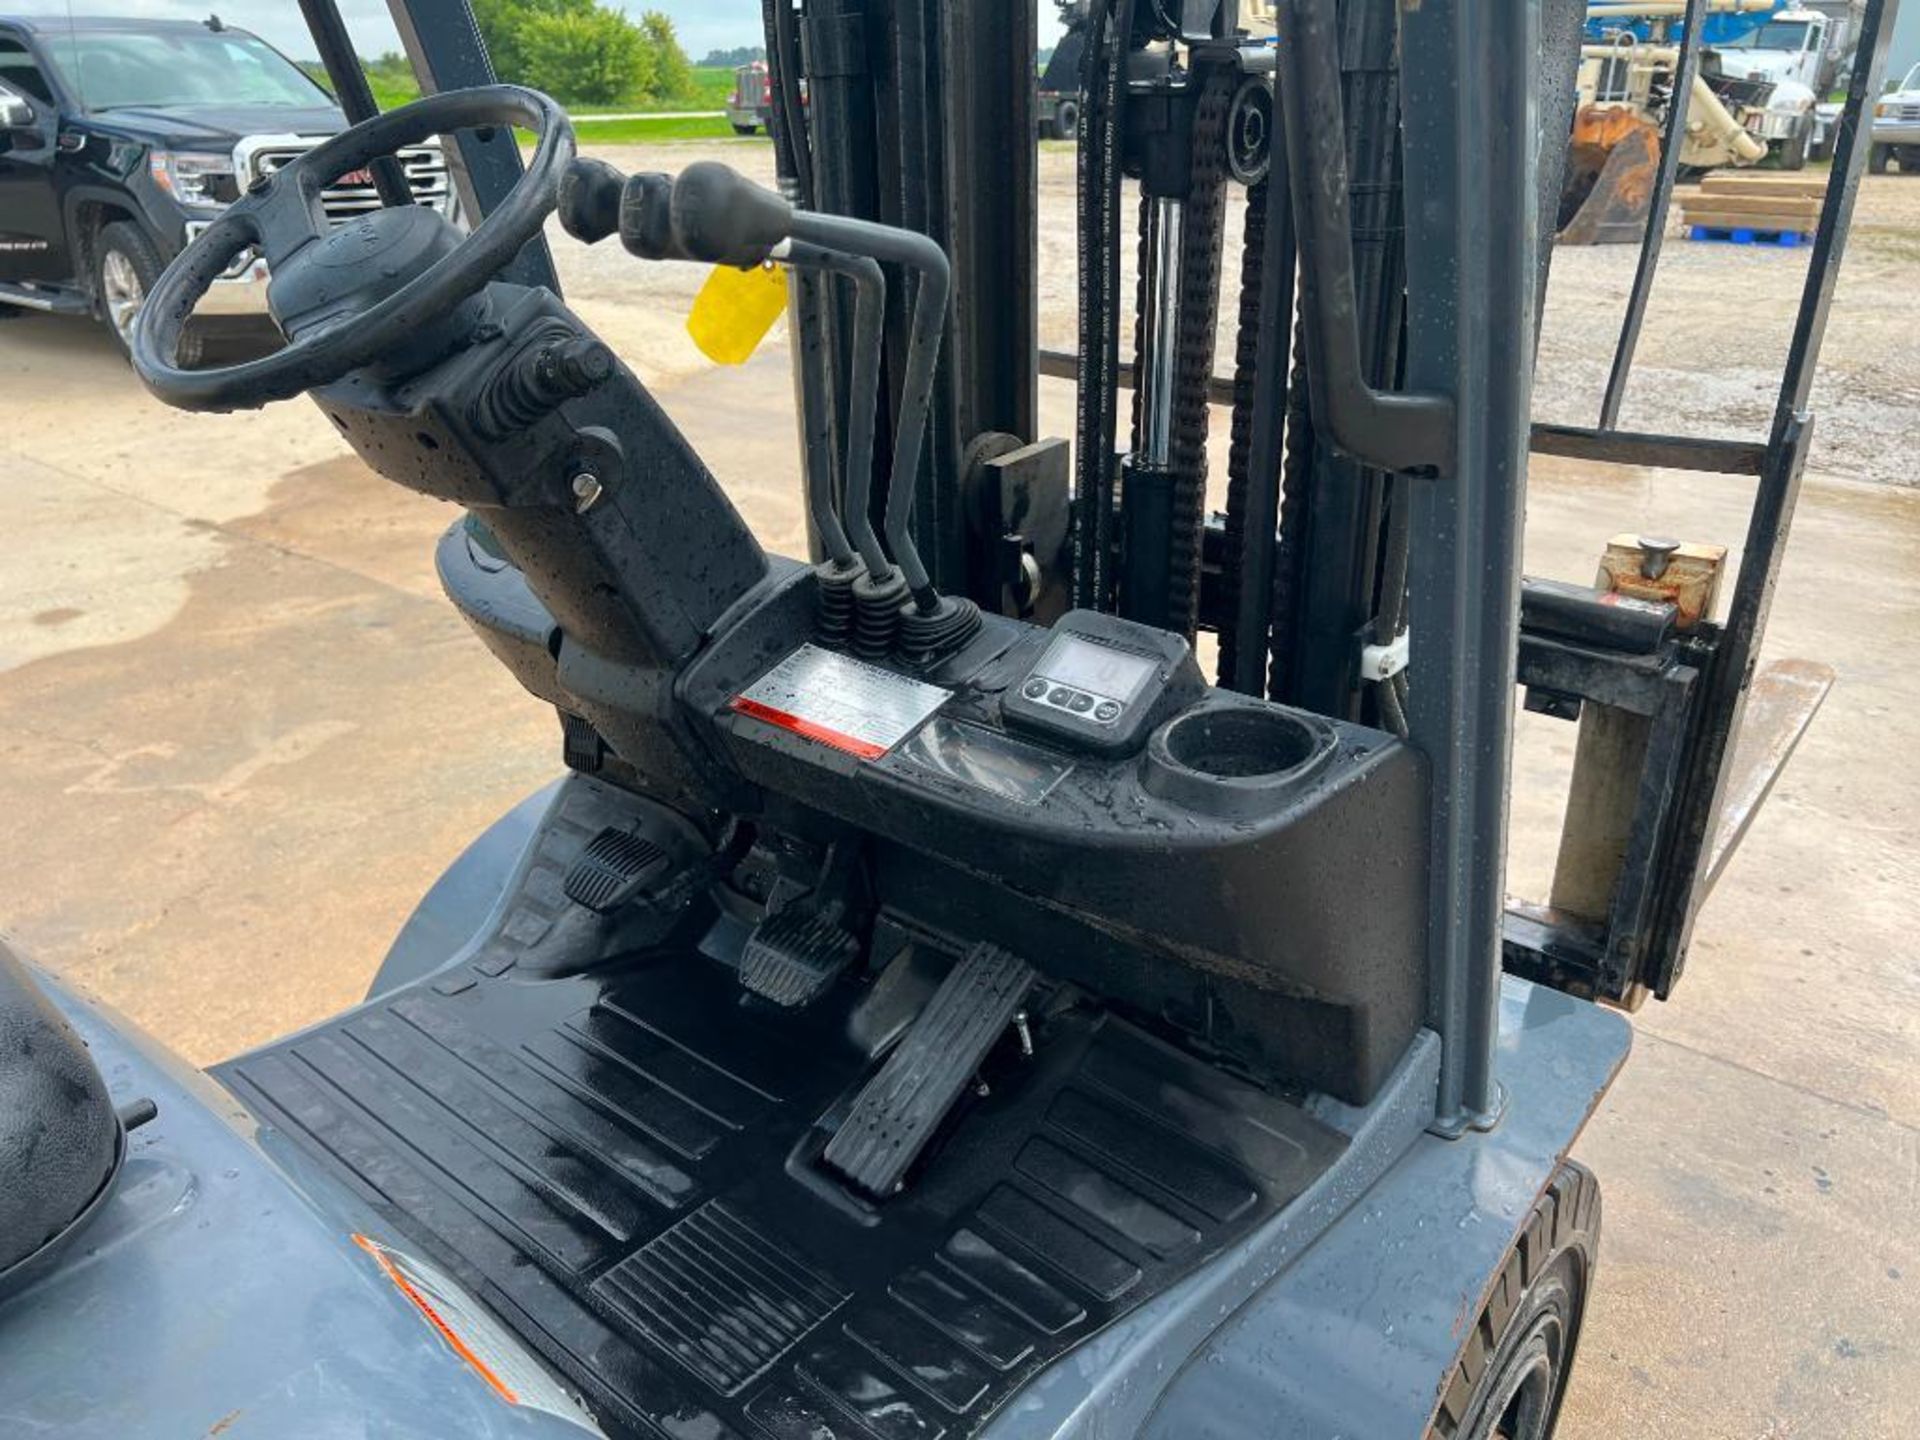 Toyota Forklift Truck, Model 8FGU25, Hours 5,264, LP. Located in Altamont, IL - Image 18 of 19